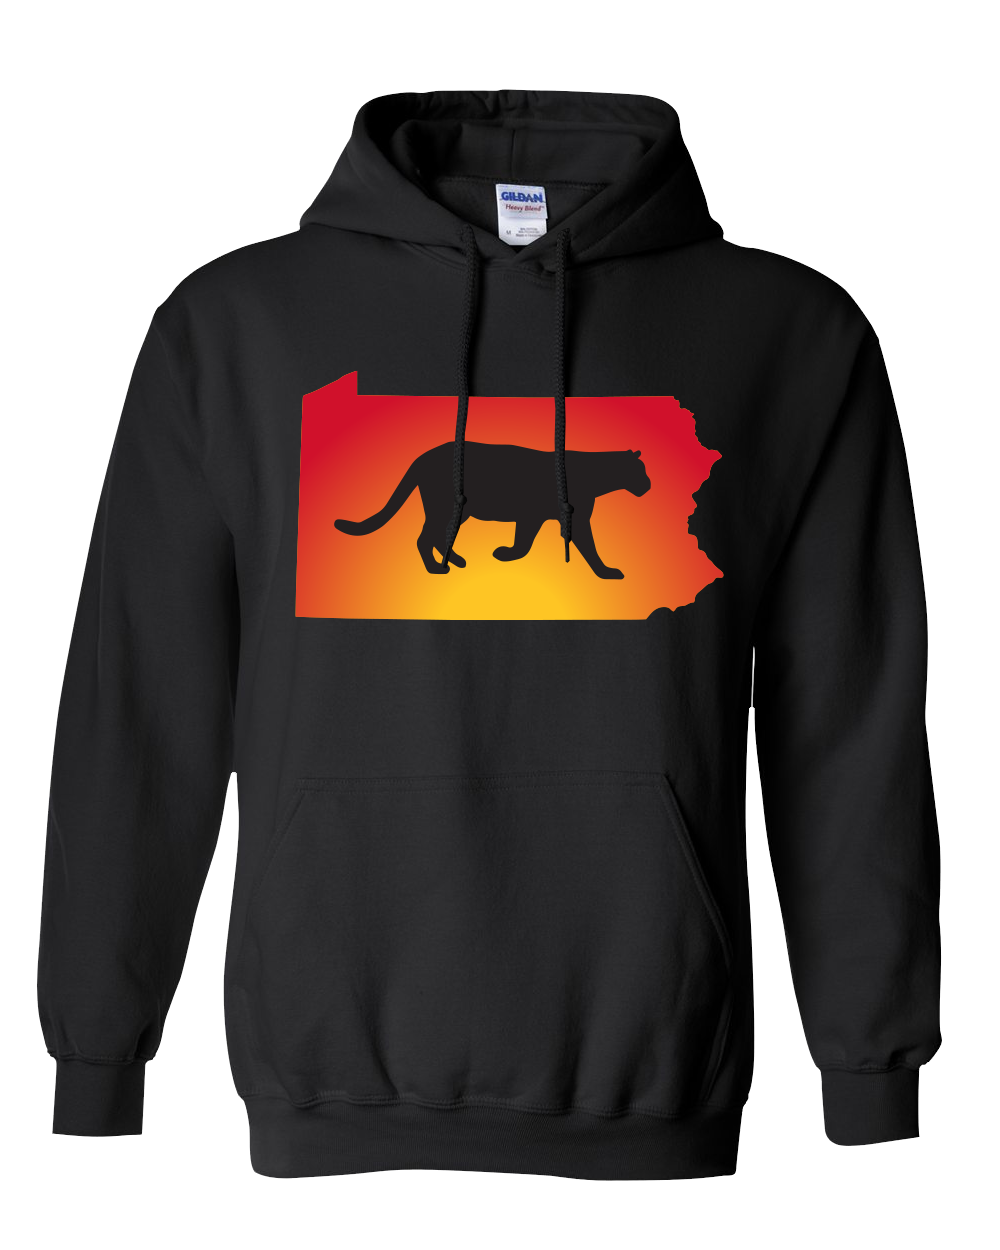 Pullover Hooded Sweatshirt Pennsylvania Black Mountain Lion Vibrant Design High Quality Tight Knit Ring Spun Low Maintenance Cotton Printed With The Newest Available Color Transfer Technology